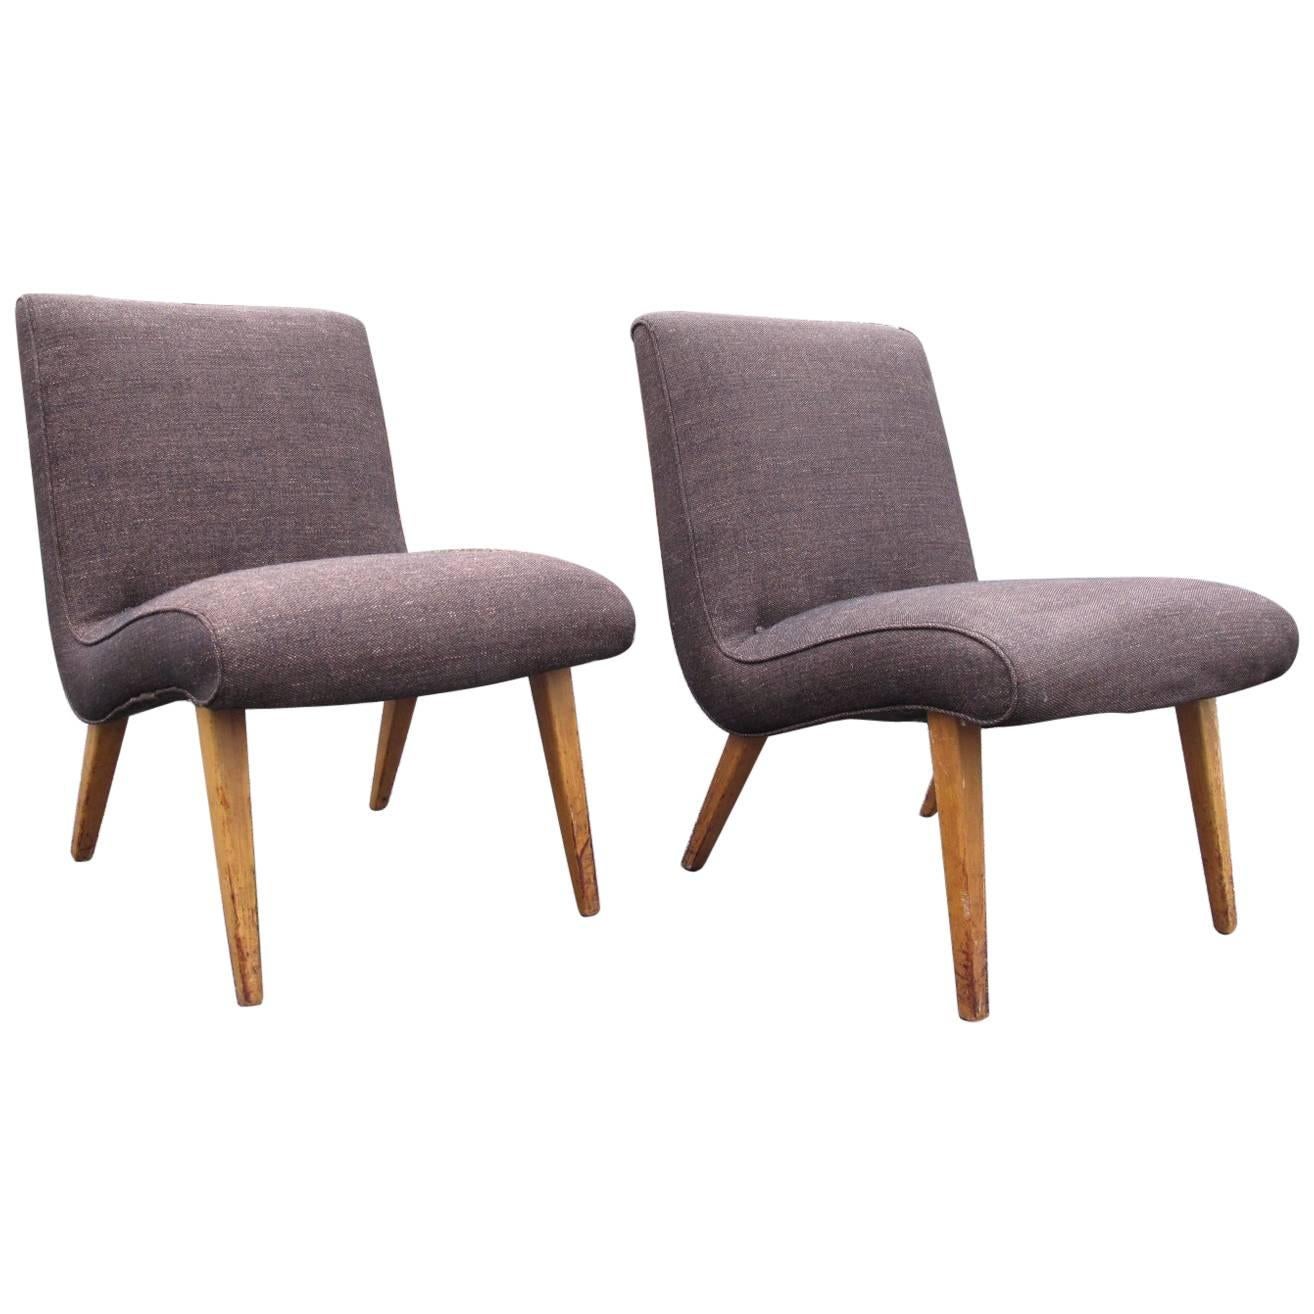 Jens Risom Scoop Chairs for Knoll